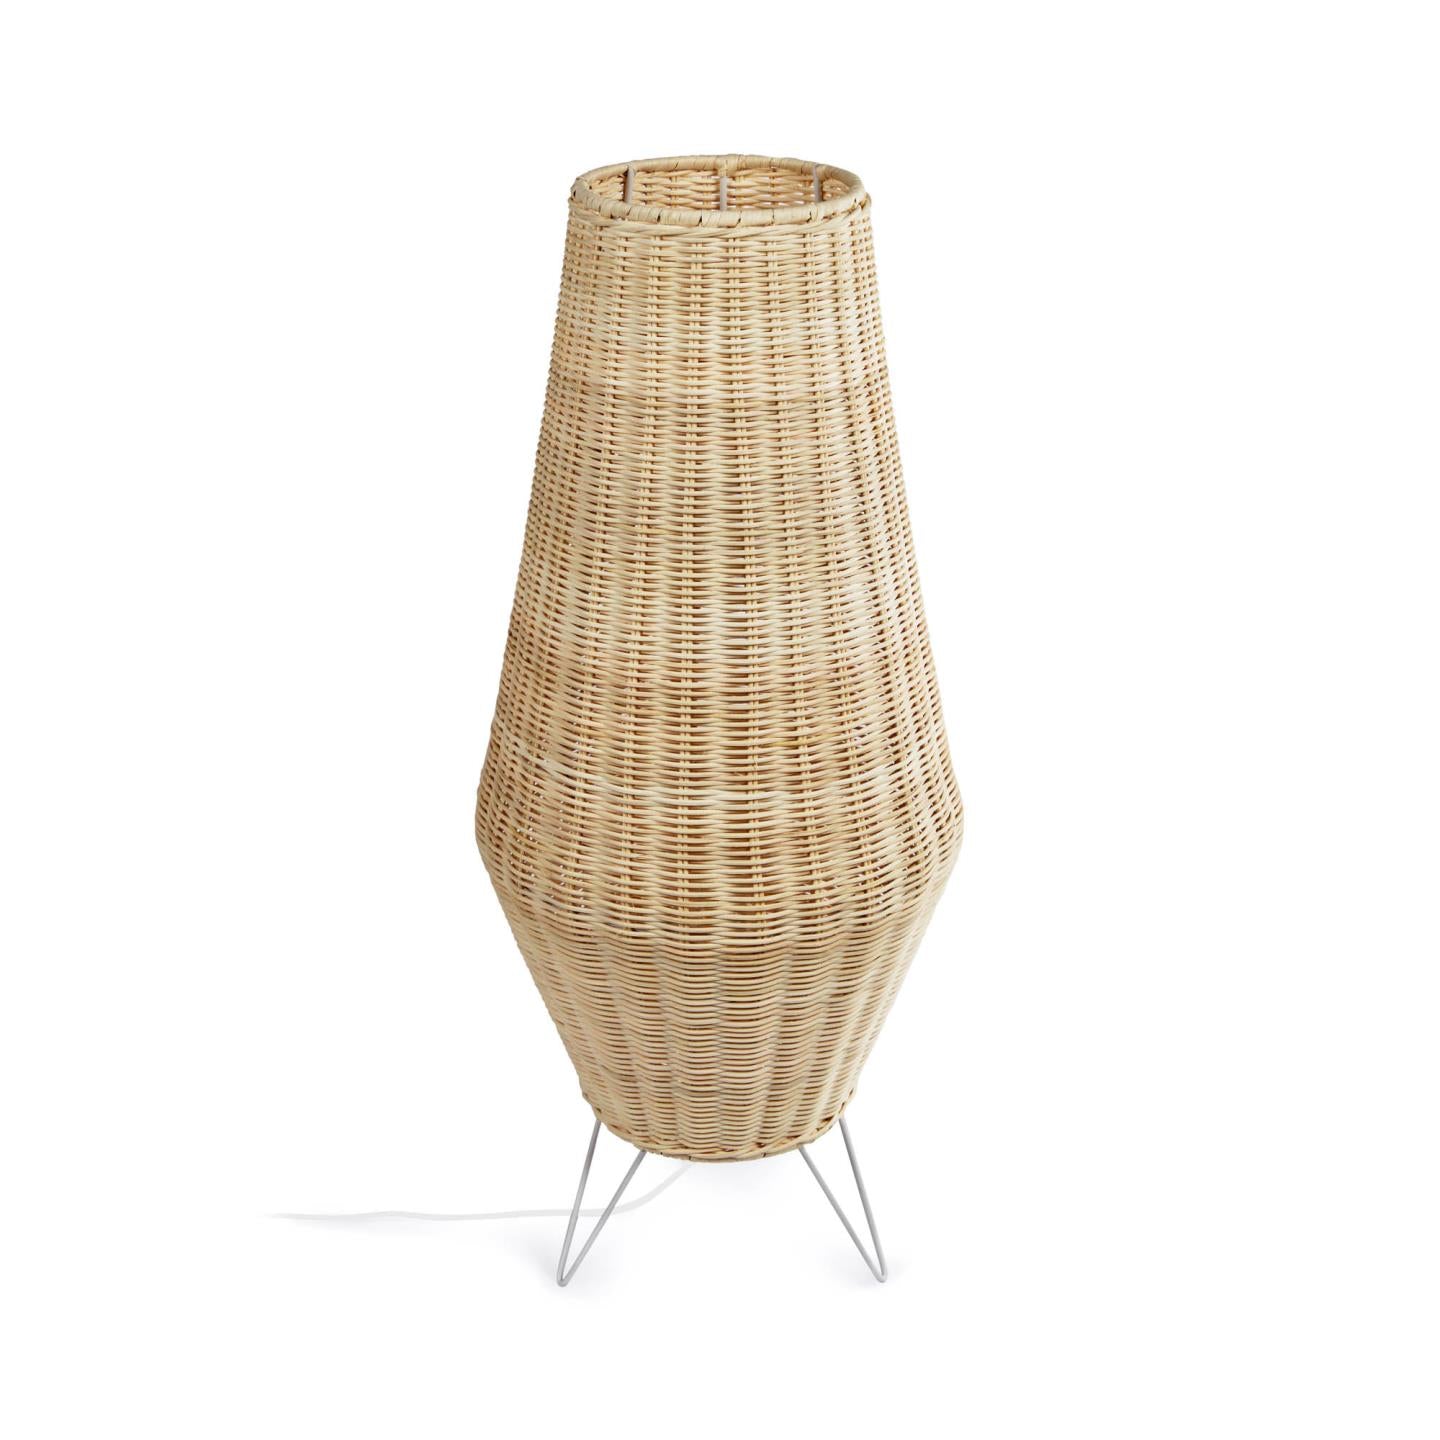 Large Kamaria floor lamp in rattan with natural finish